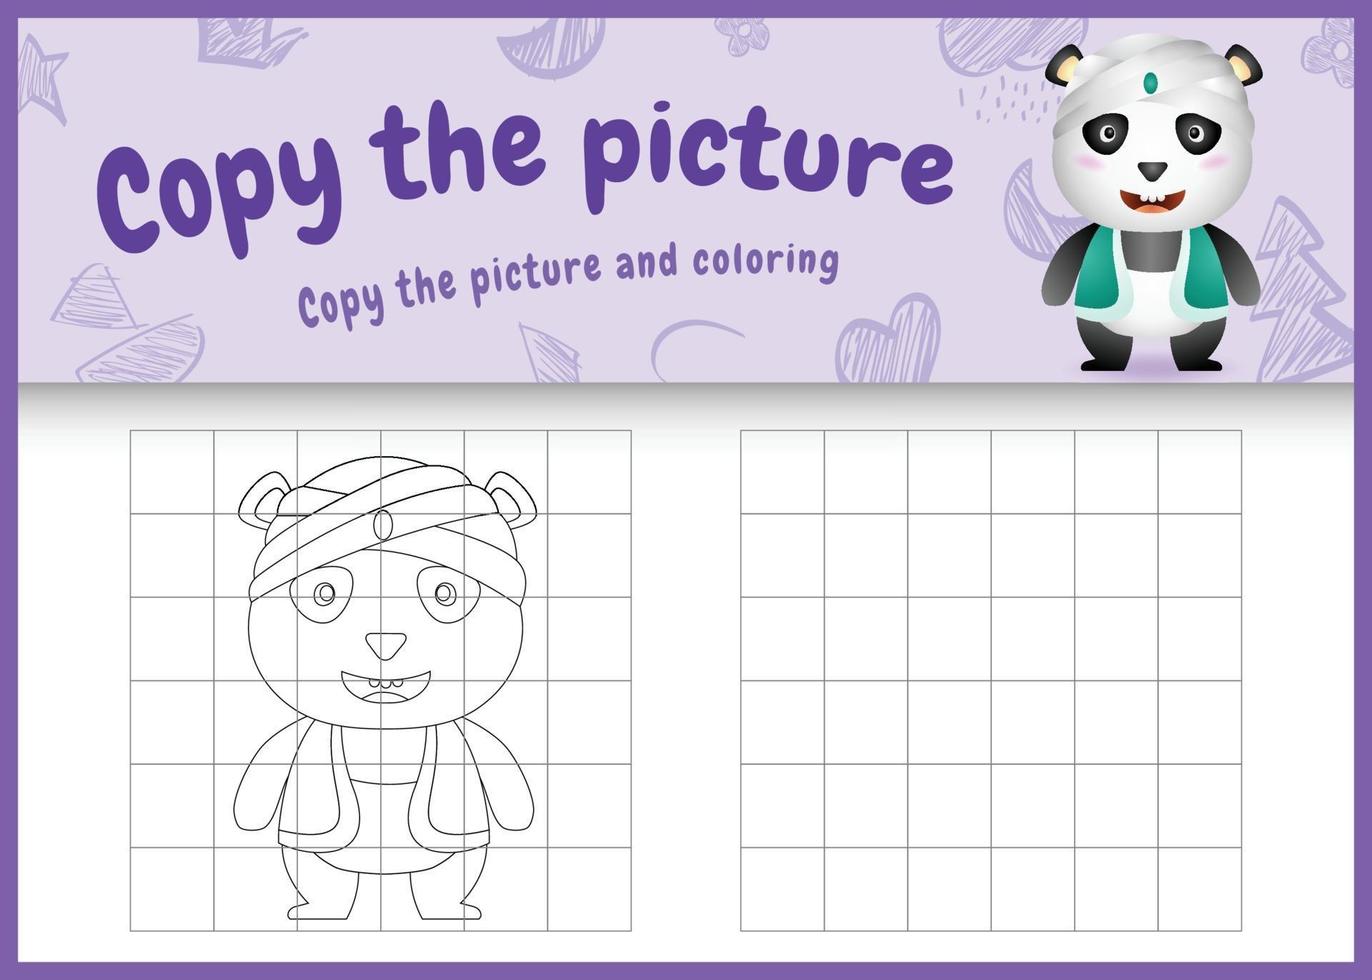 copy the picture kids game and coloring page themed ramadan with a cute panda using arabic traditional costume vector